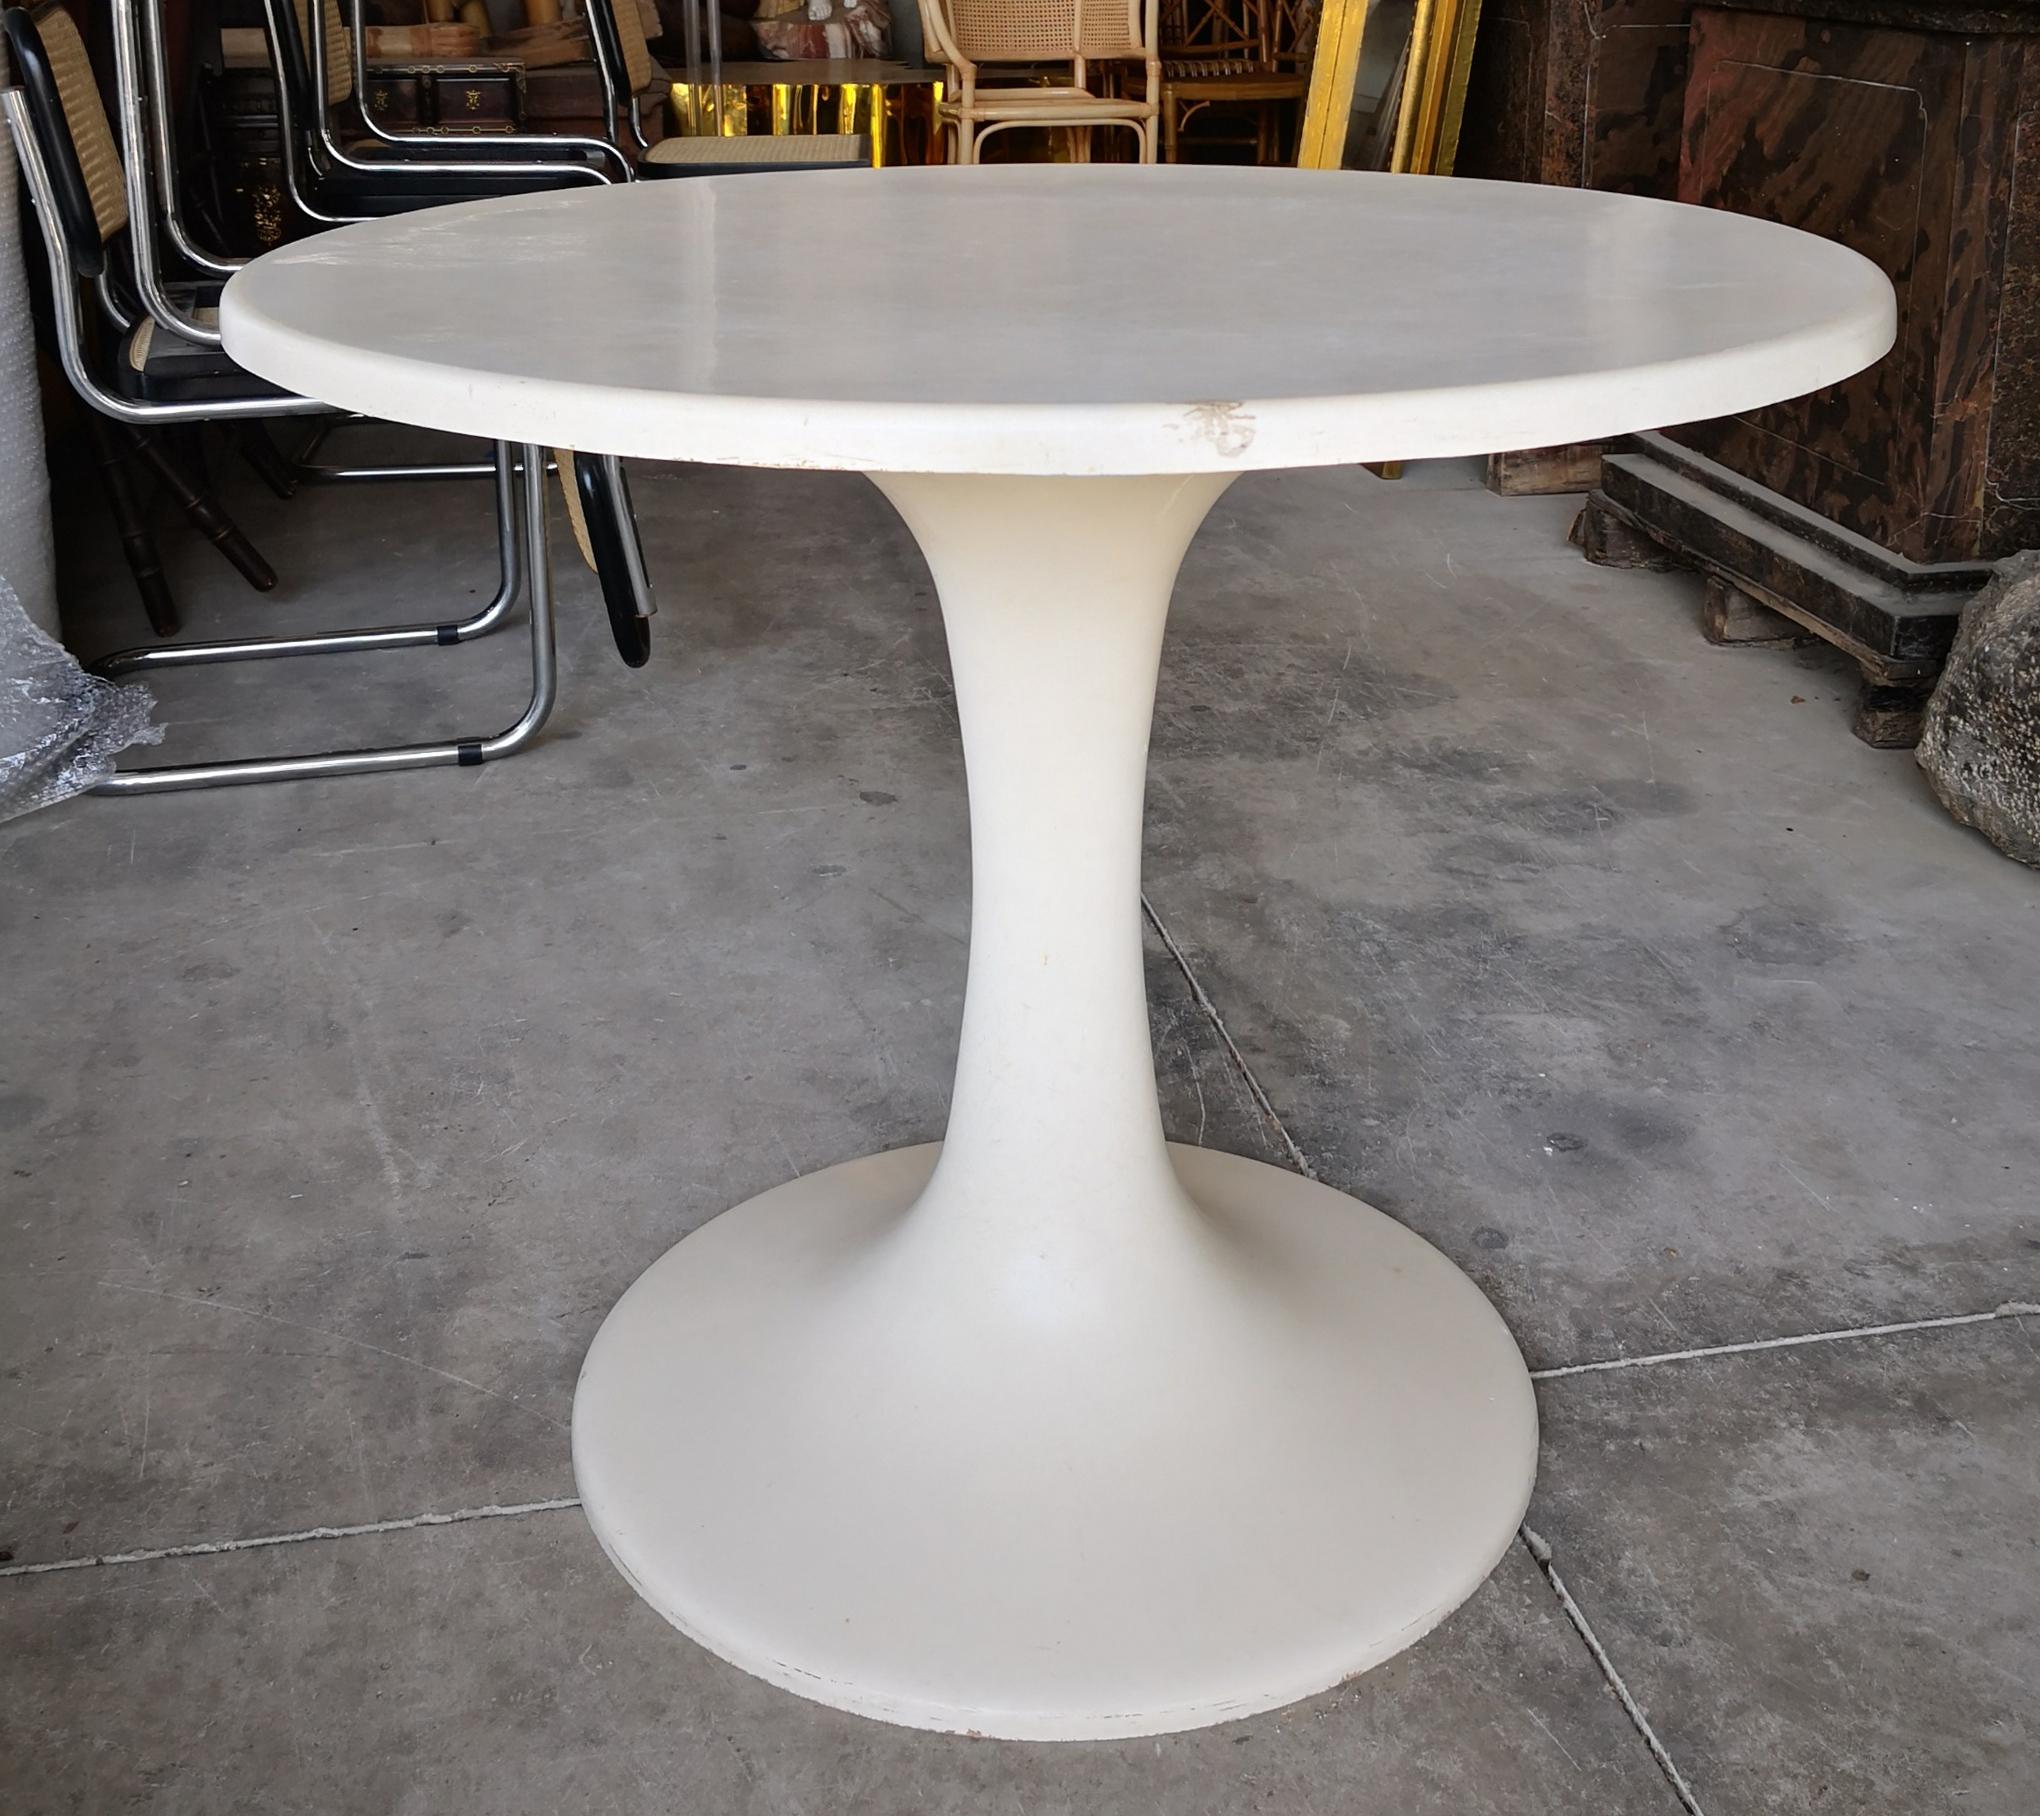 Round resin table in the style of Eero Saarinen Tulip base by Knoll.